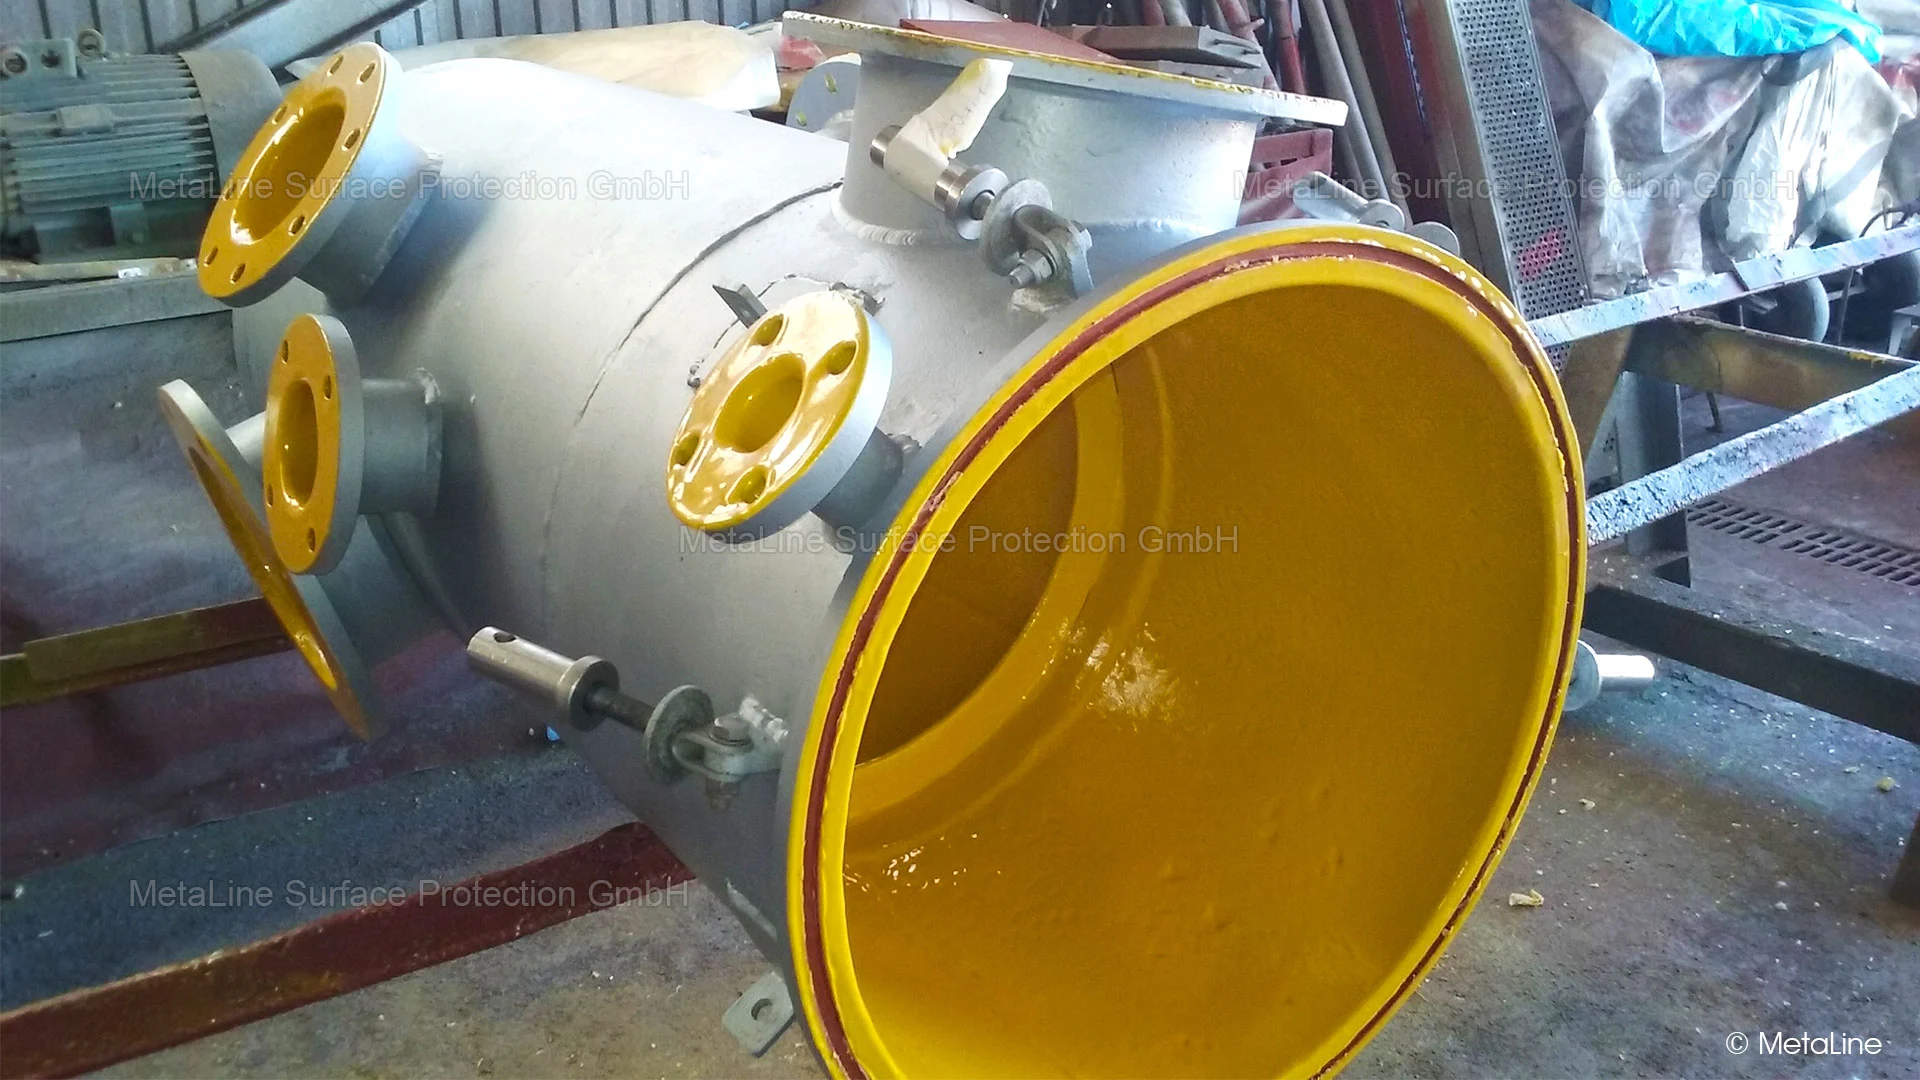 <!-- START: ConditionalContent --><!-- END: ConditionalContent -->   <!-- START: ConditionalContent --> Propulsion; Kort nozzle; Thruster; Coating; Anti-Fouling; Cavitation; Antifouling; Protection; Wear; Corrosion; Jet propulsion;  <!-- END: ConditionalContent -->   <!-- START: ConditionalContent --><!-- END: ConditionalContent -->   <!-- START: ConditionalContent --><!-- END: ConditionalContent -->